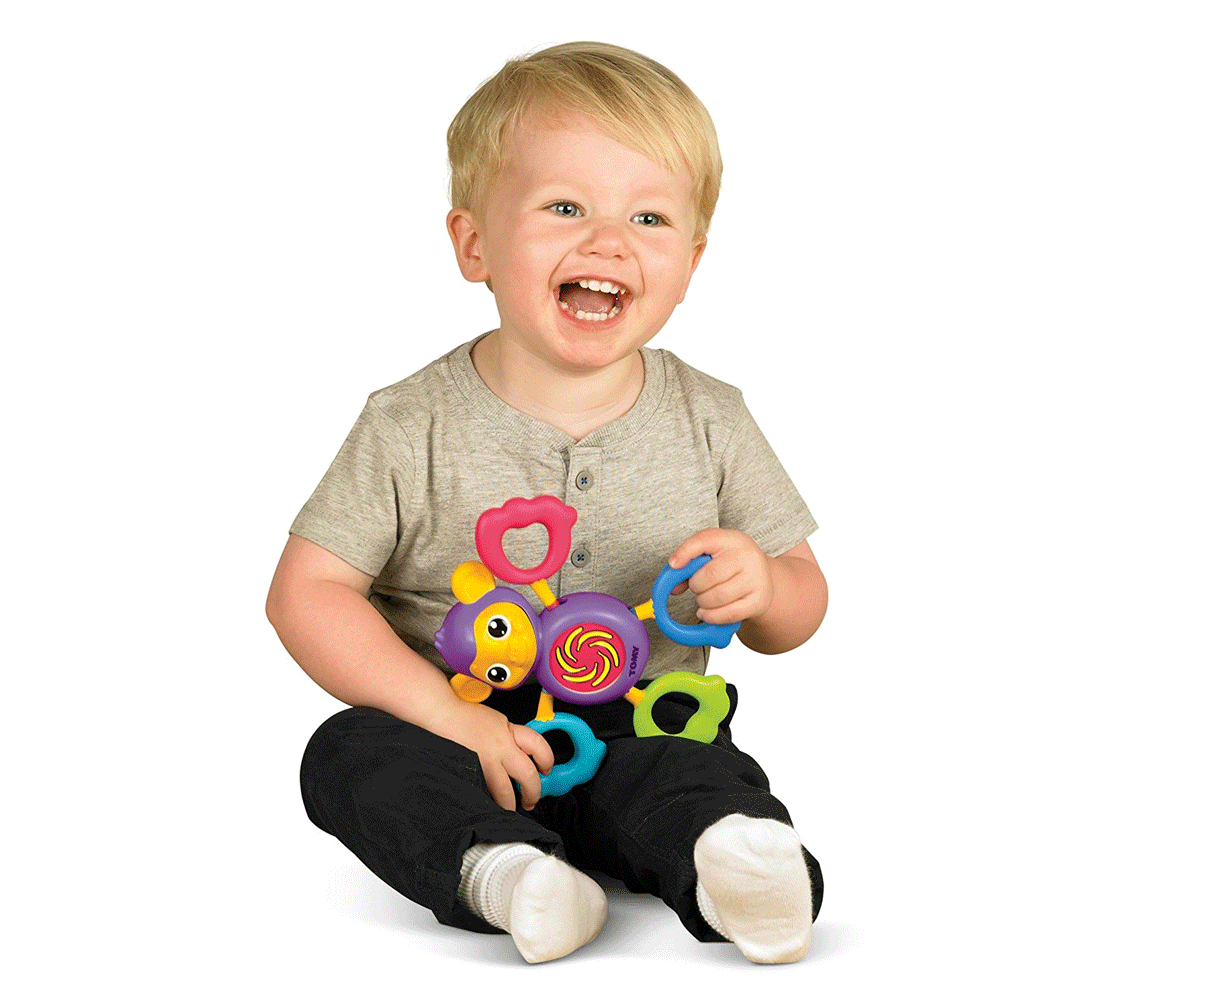 Tomy Grip and Grab Musical Monkey Sound Playing/Activity Toy for Baby/Toddler